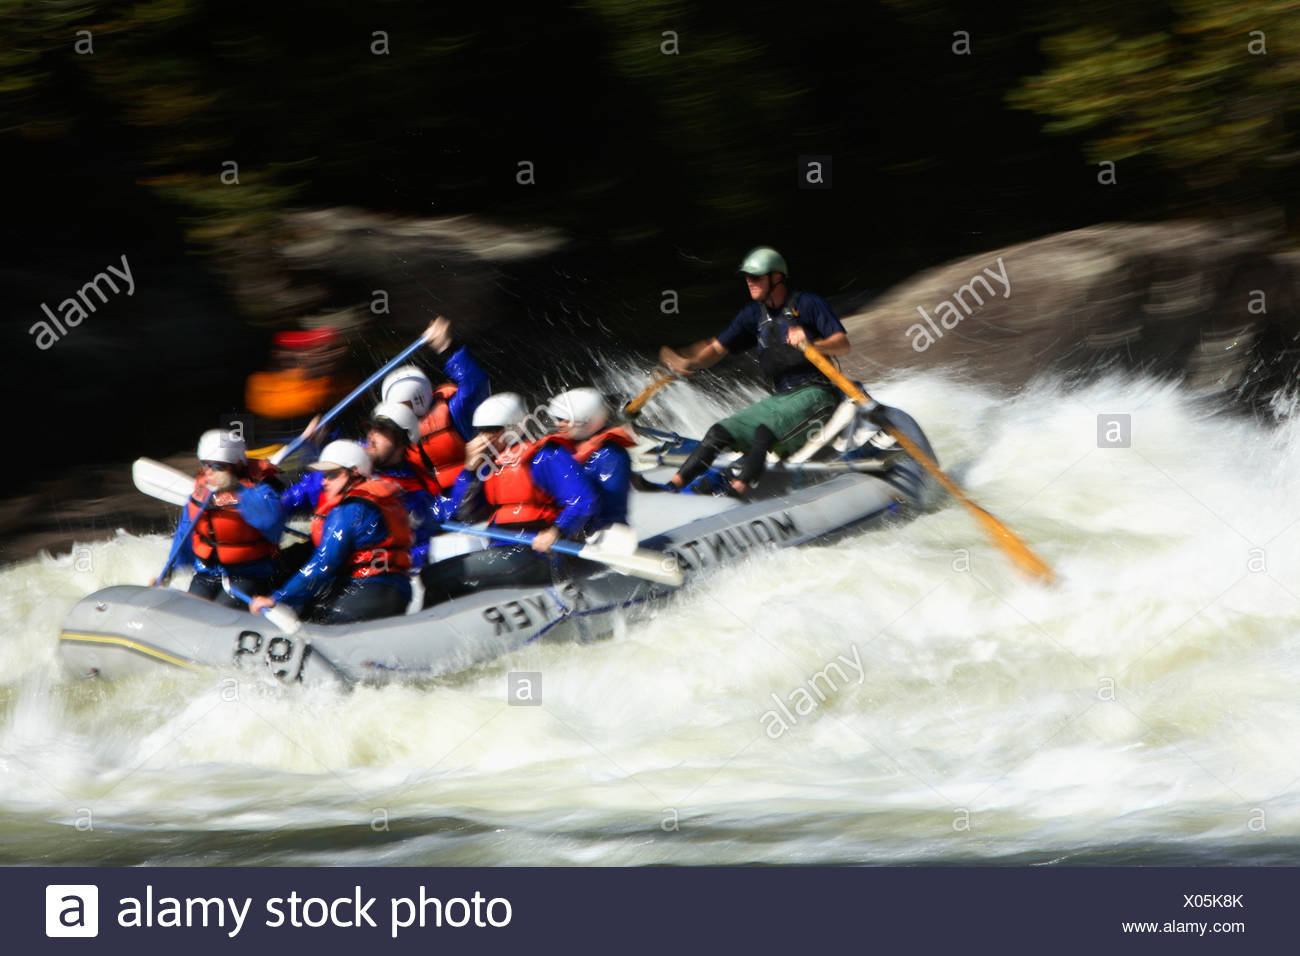 Motion Blur Photo Of Unknown Whitewater Rafters Crashing Through